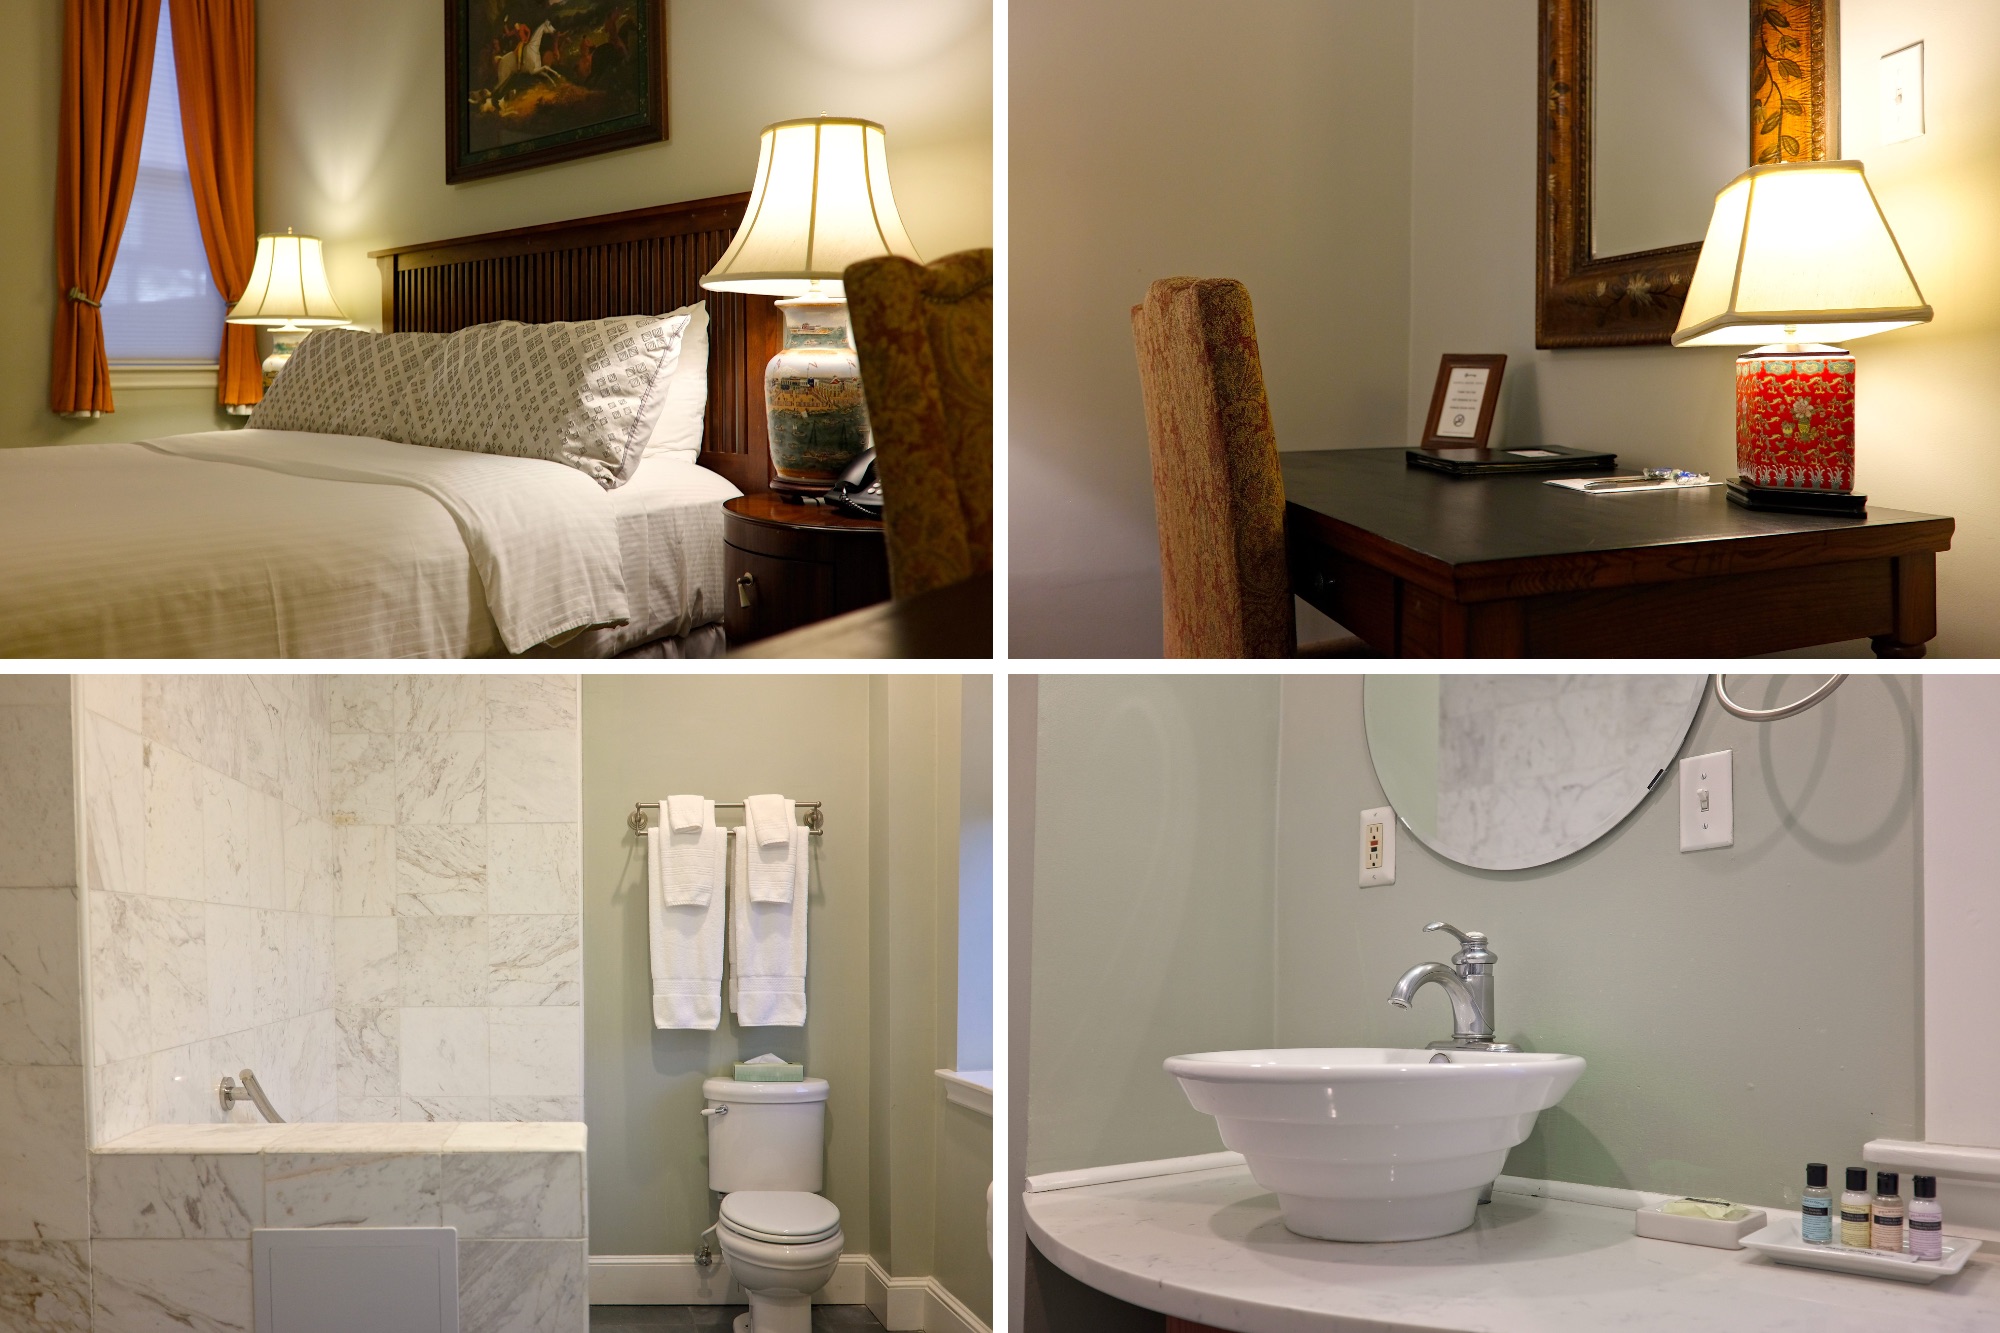 Four images in the Luxury Room 502